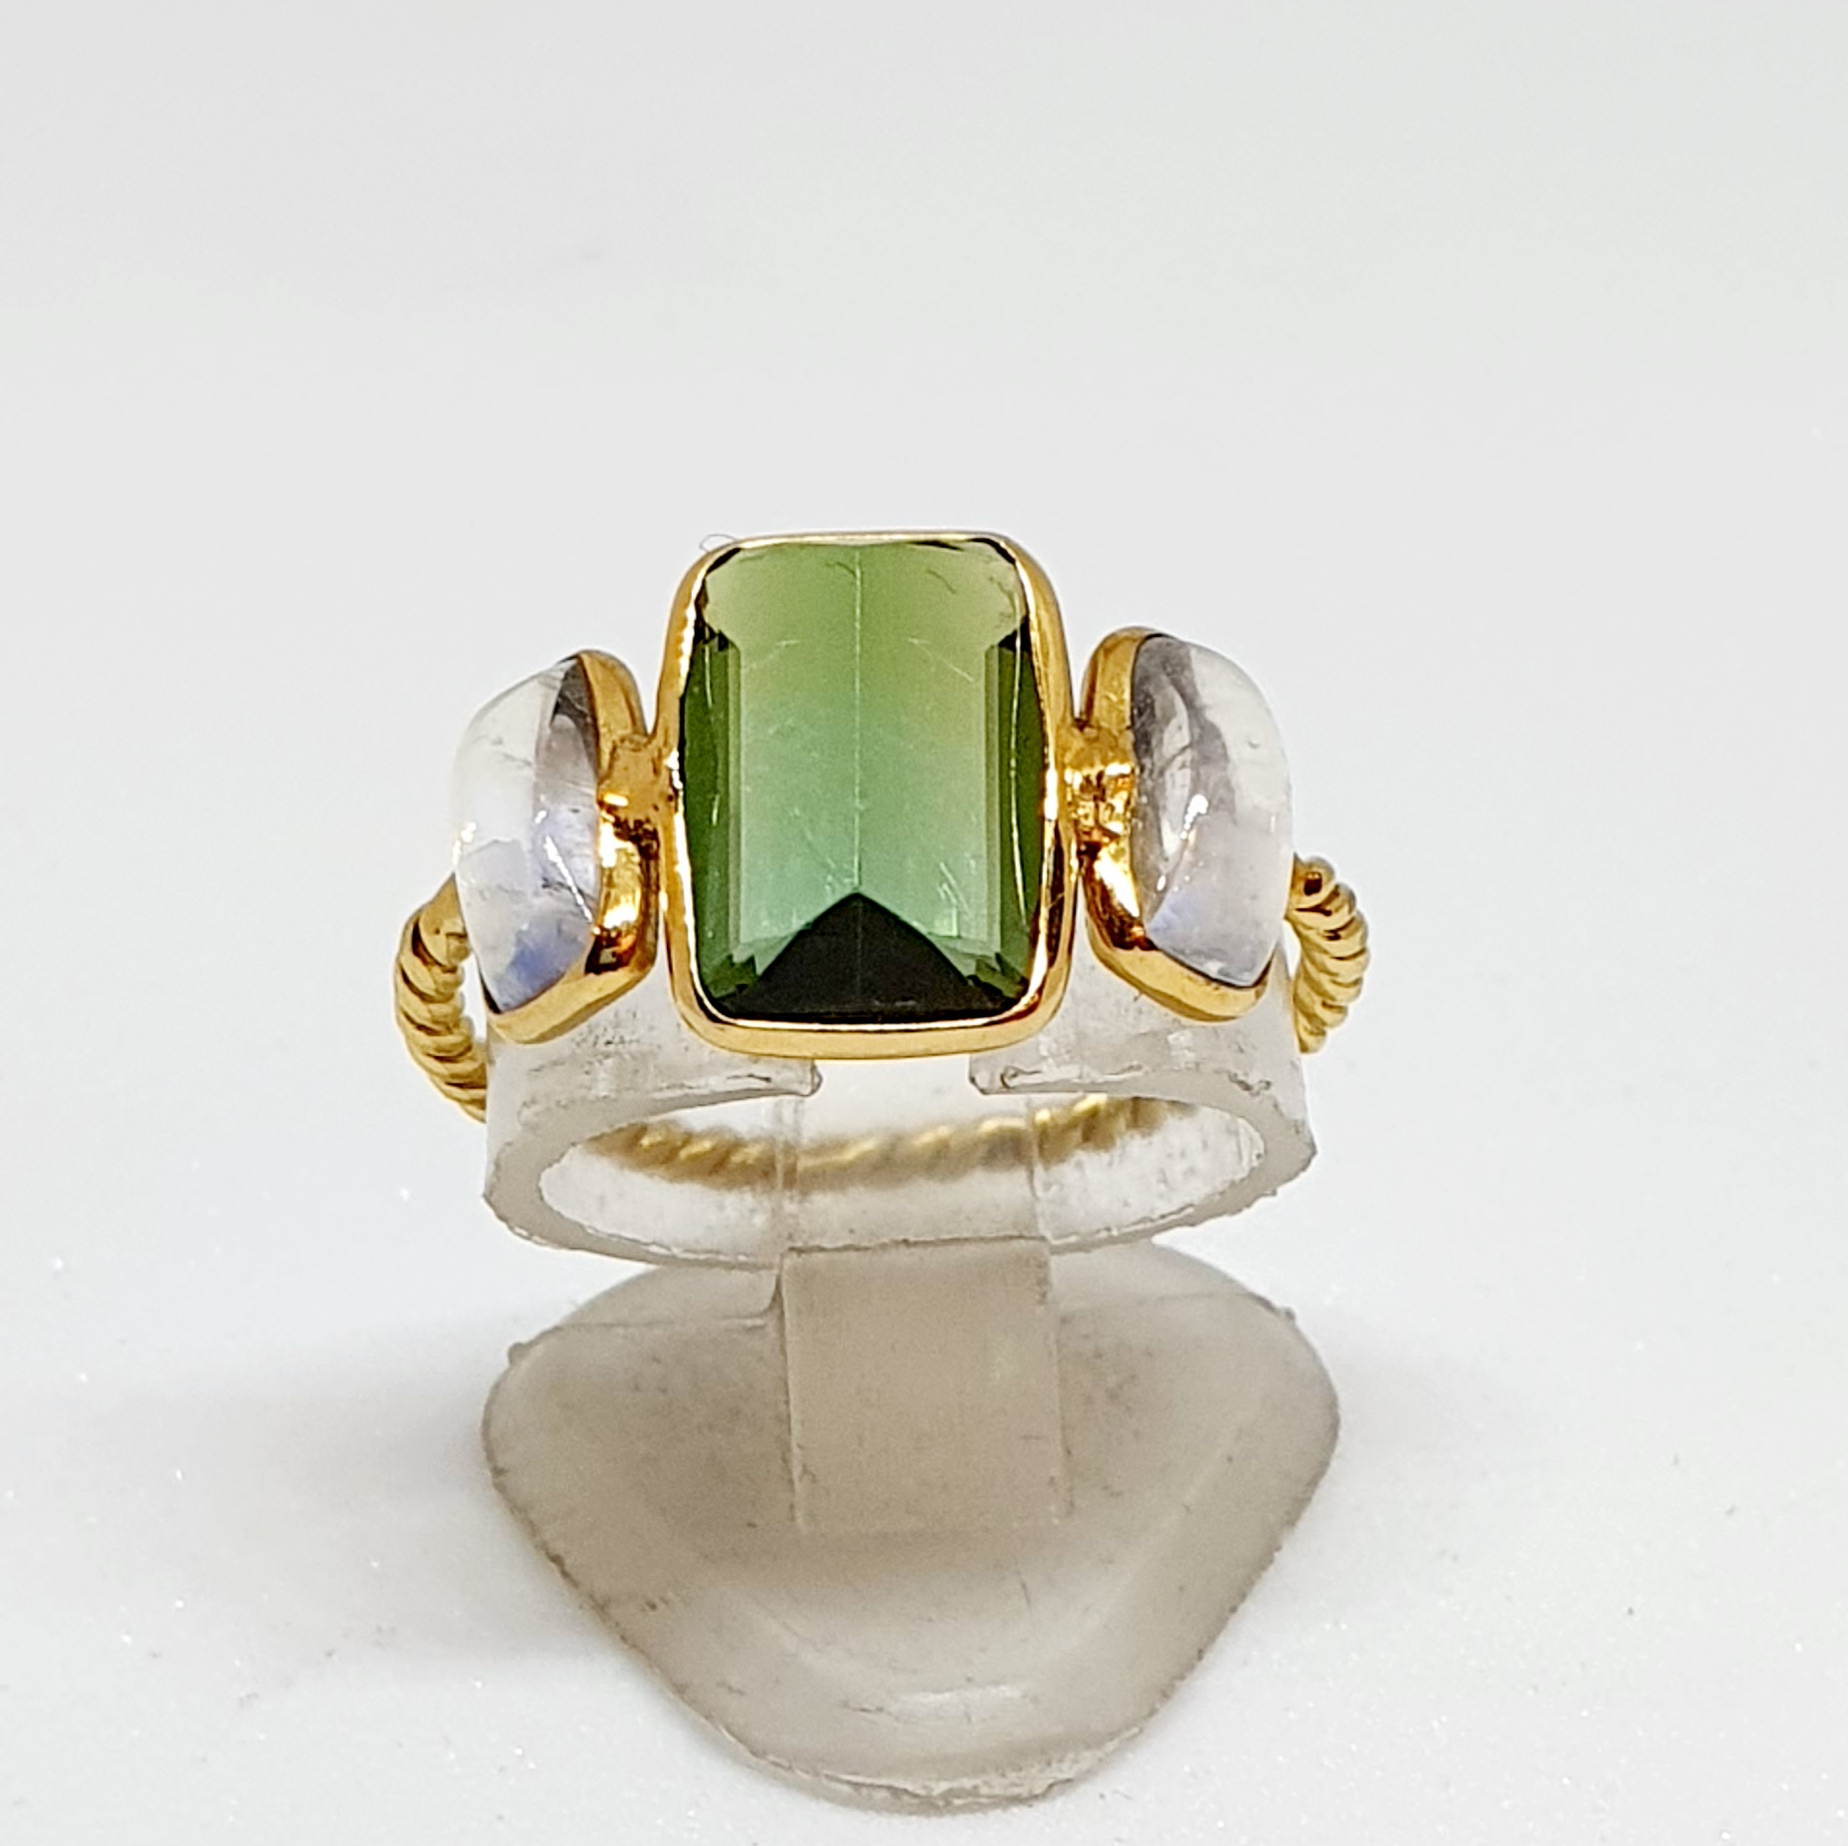 Star Ring with Green Pearl - KhammaGhani